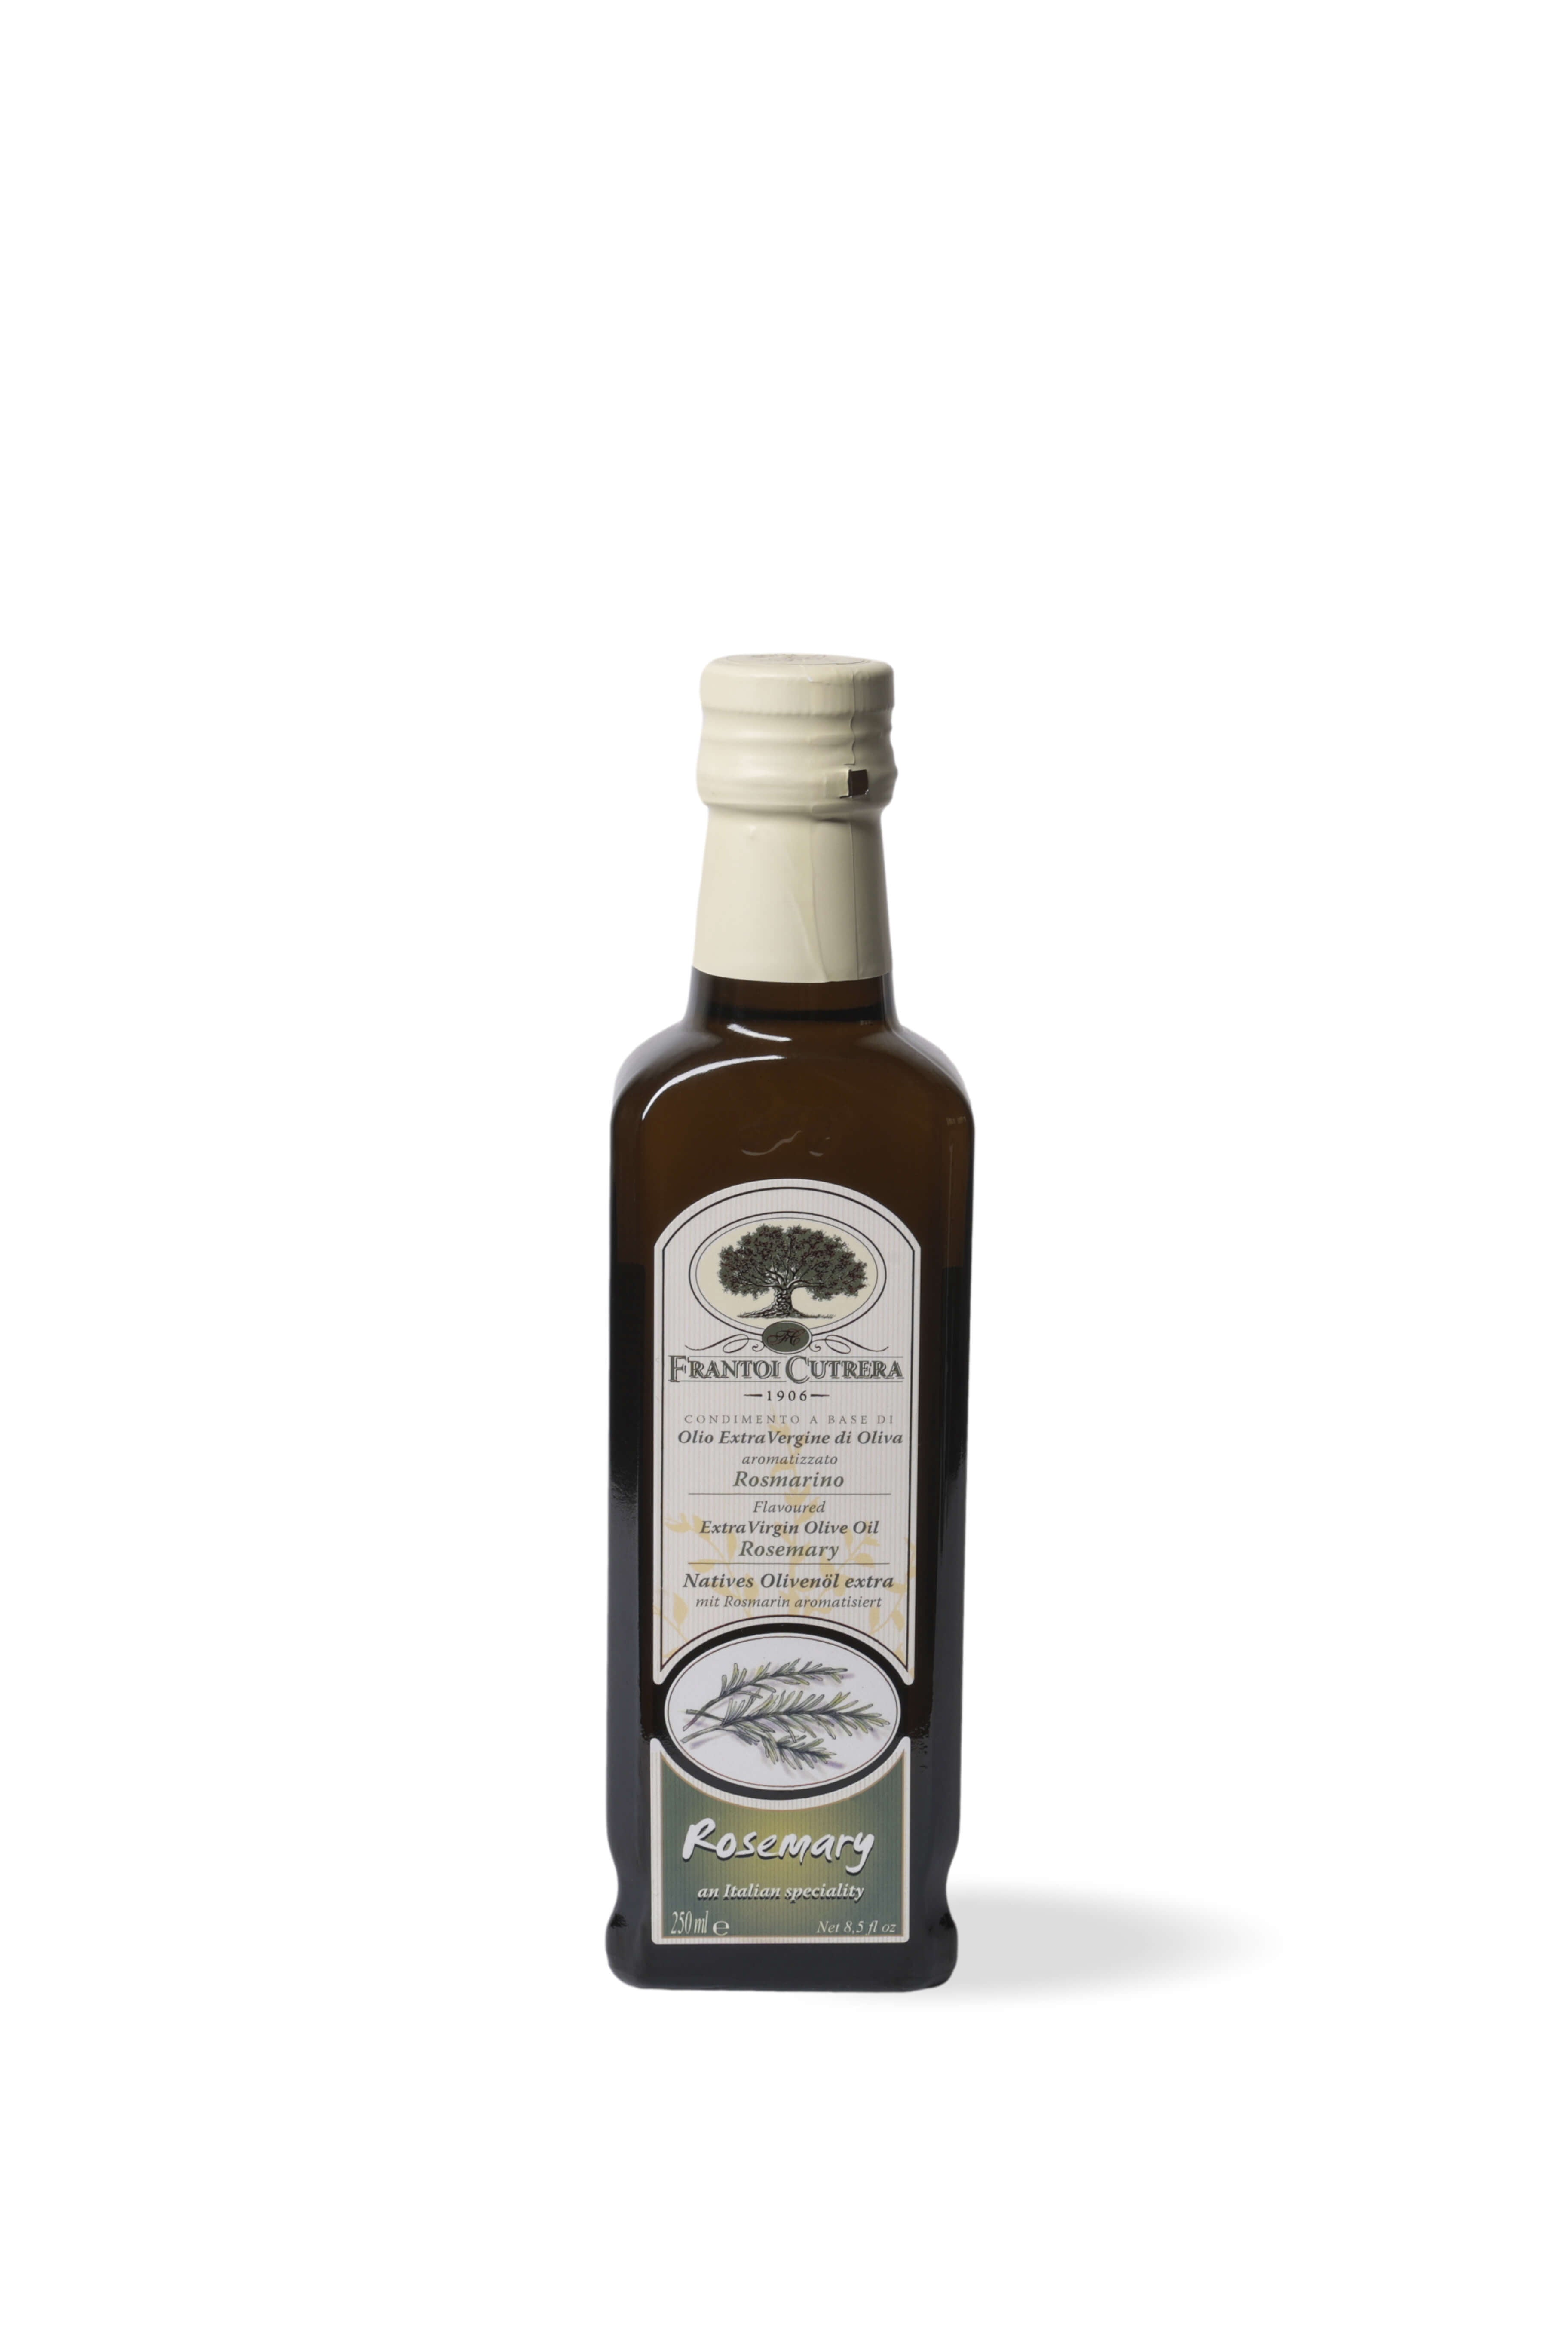 Extra virgin olive oil flavored with rosemary